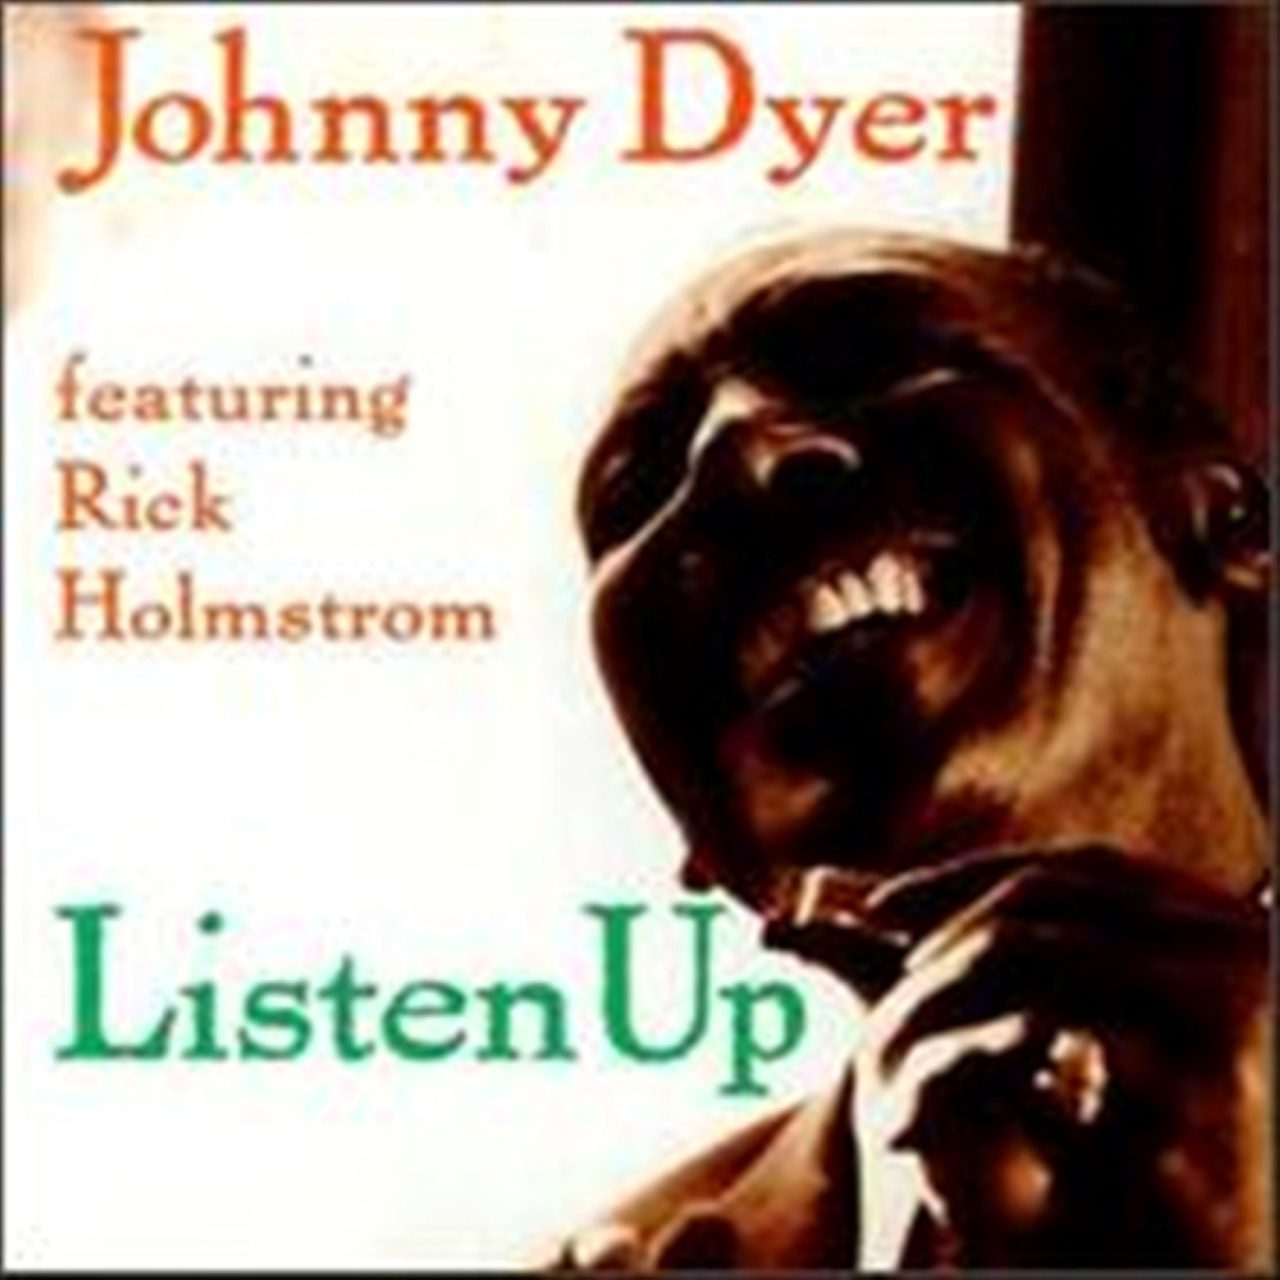 Johnny Dyer feat. Rick Holmstrom – Listen Up cover album